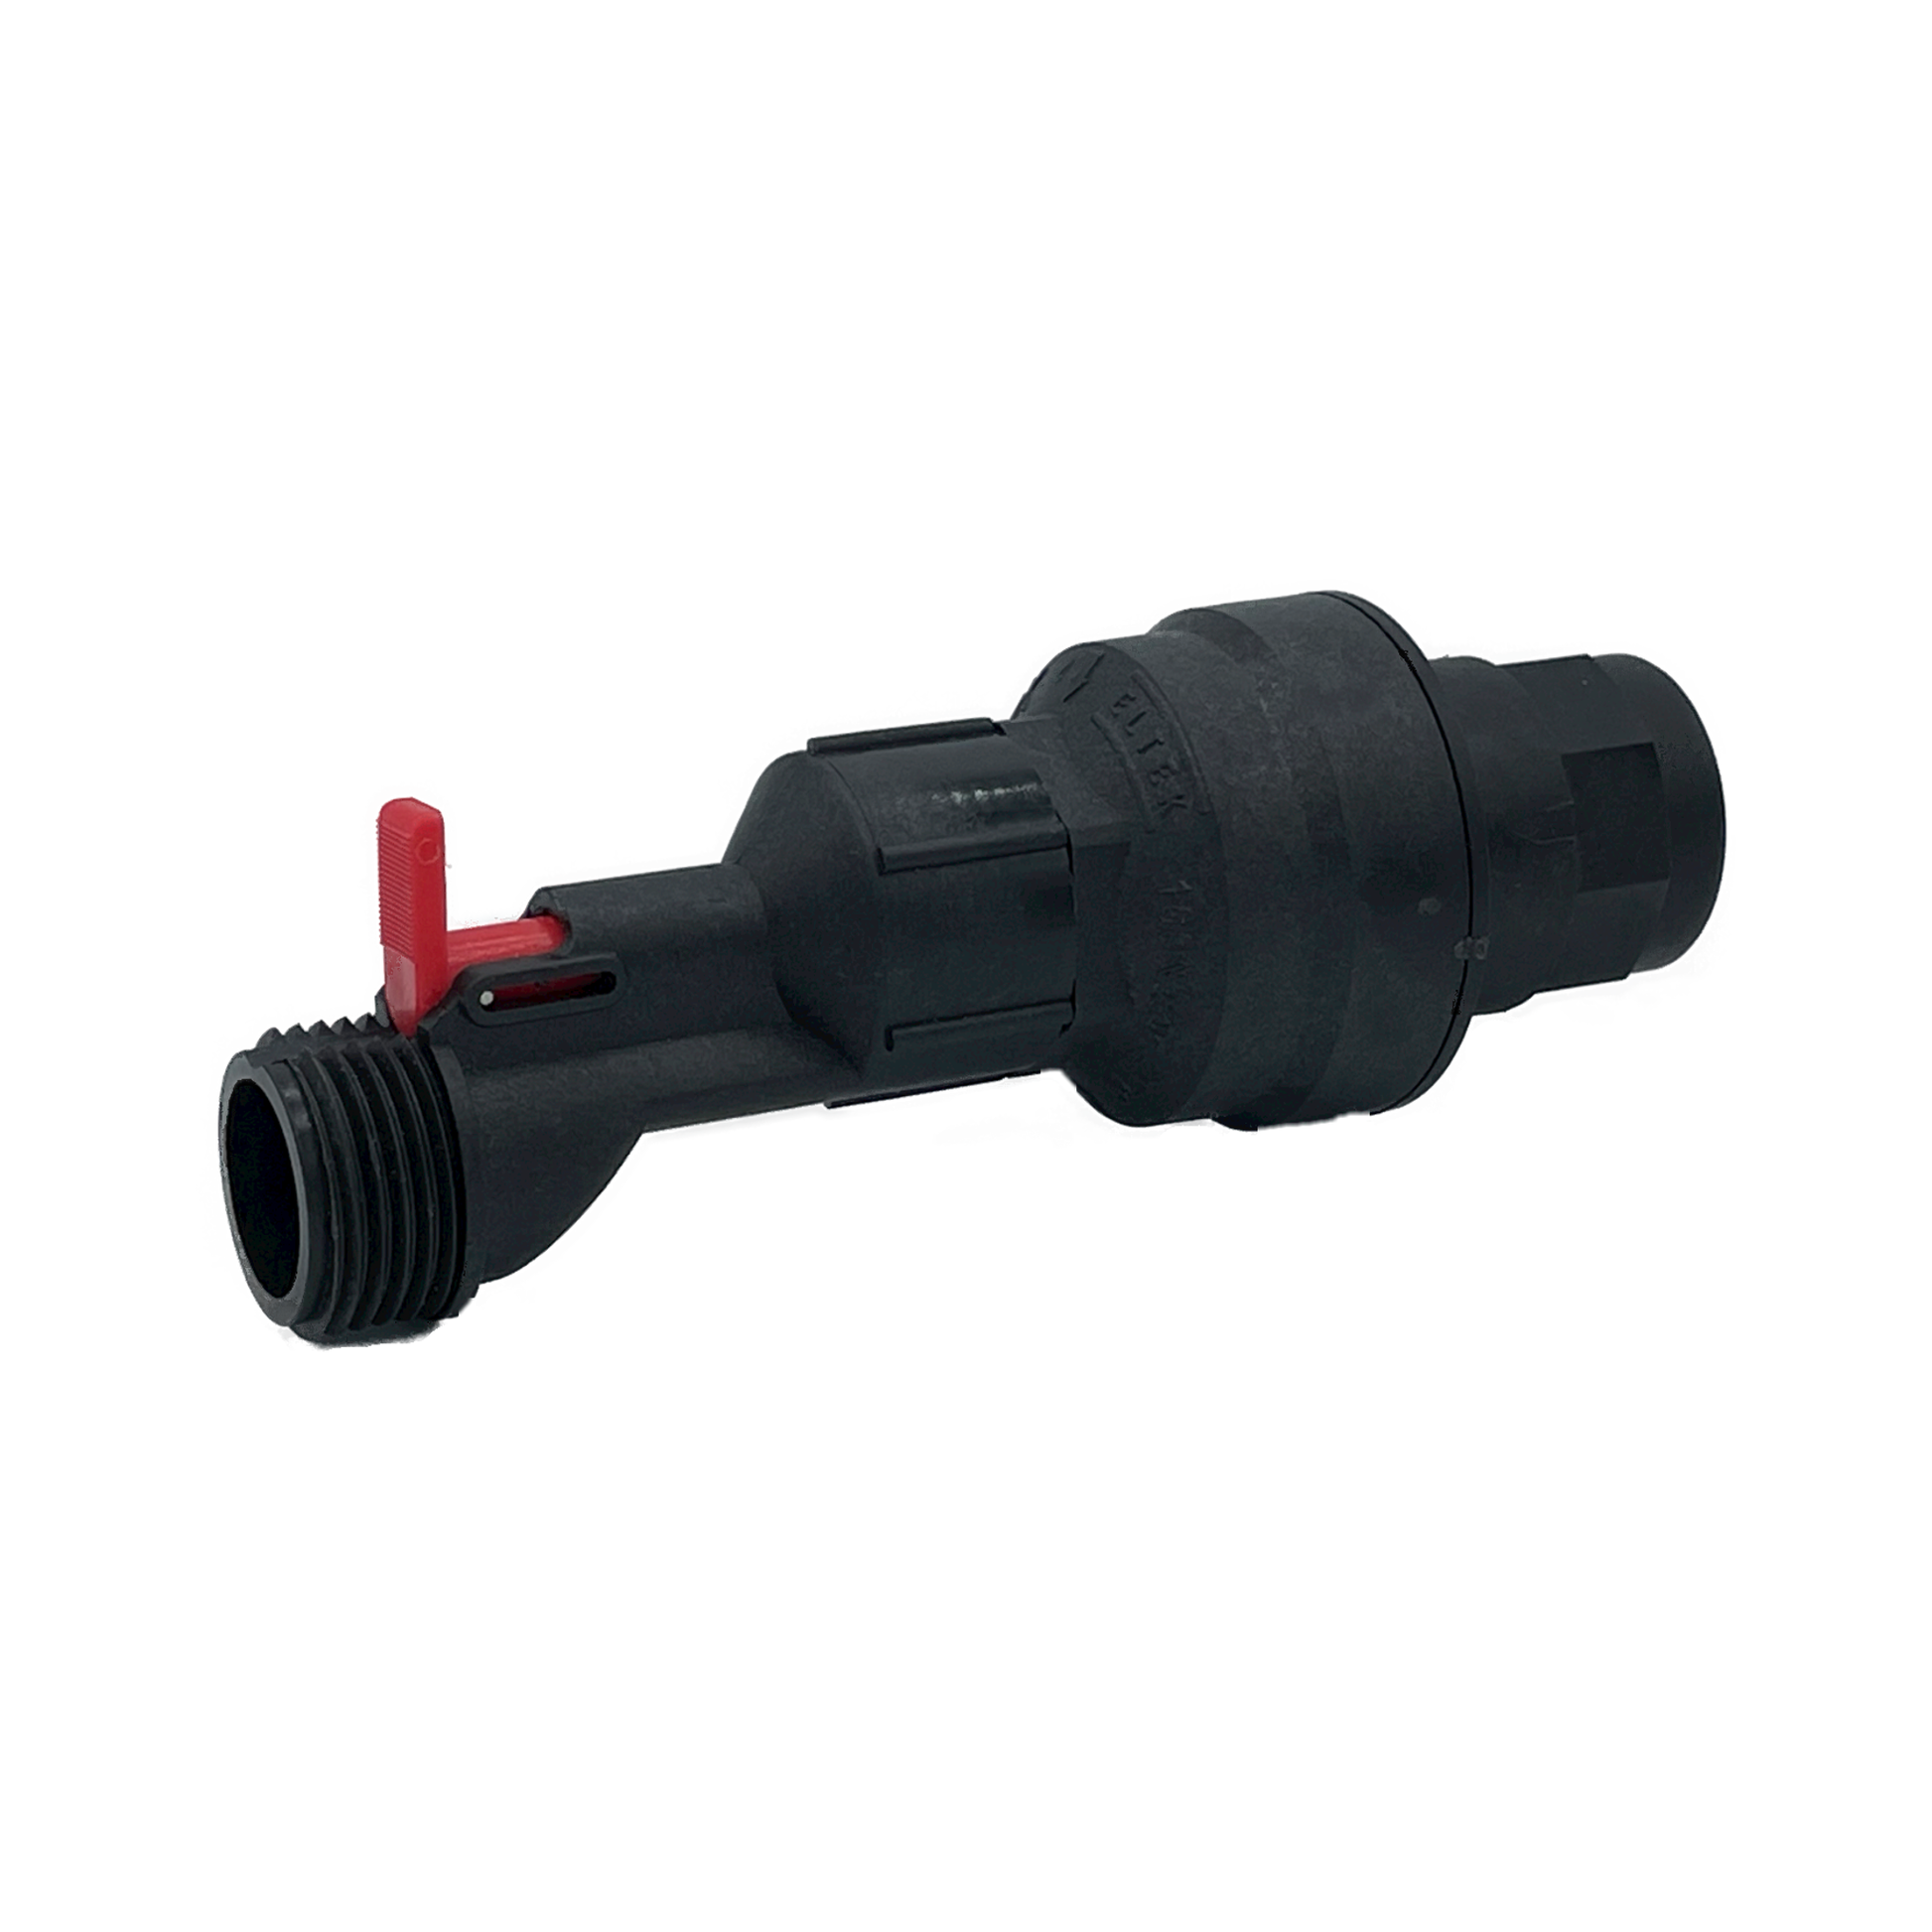 Flood and leak stop device that connects to toilets, dishwashers, sinks, ice machines, refrigerators, water fountains, washing machines, bottle filling stations, coffee machines, vending machines, and much more! Halts water overflow and excessive running.